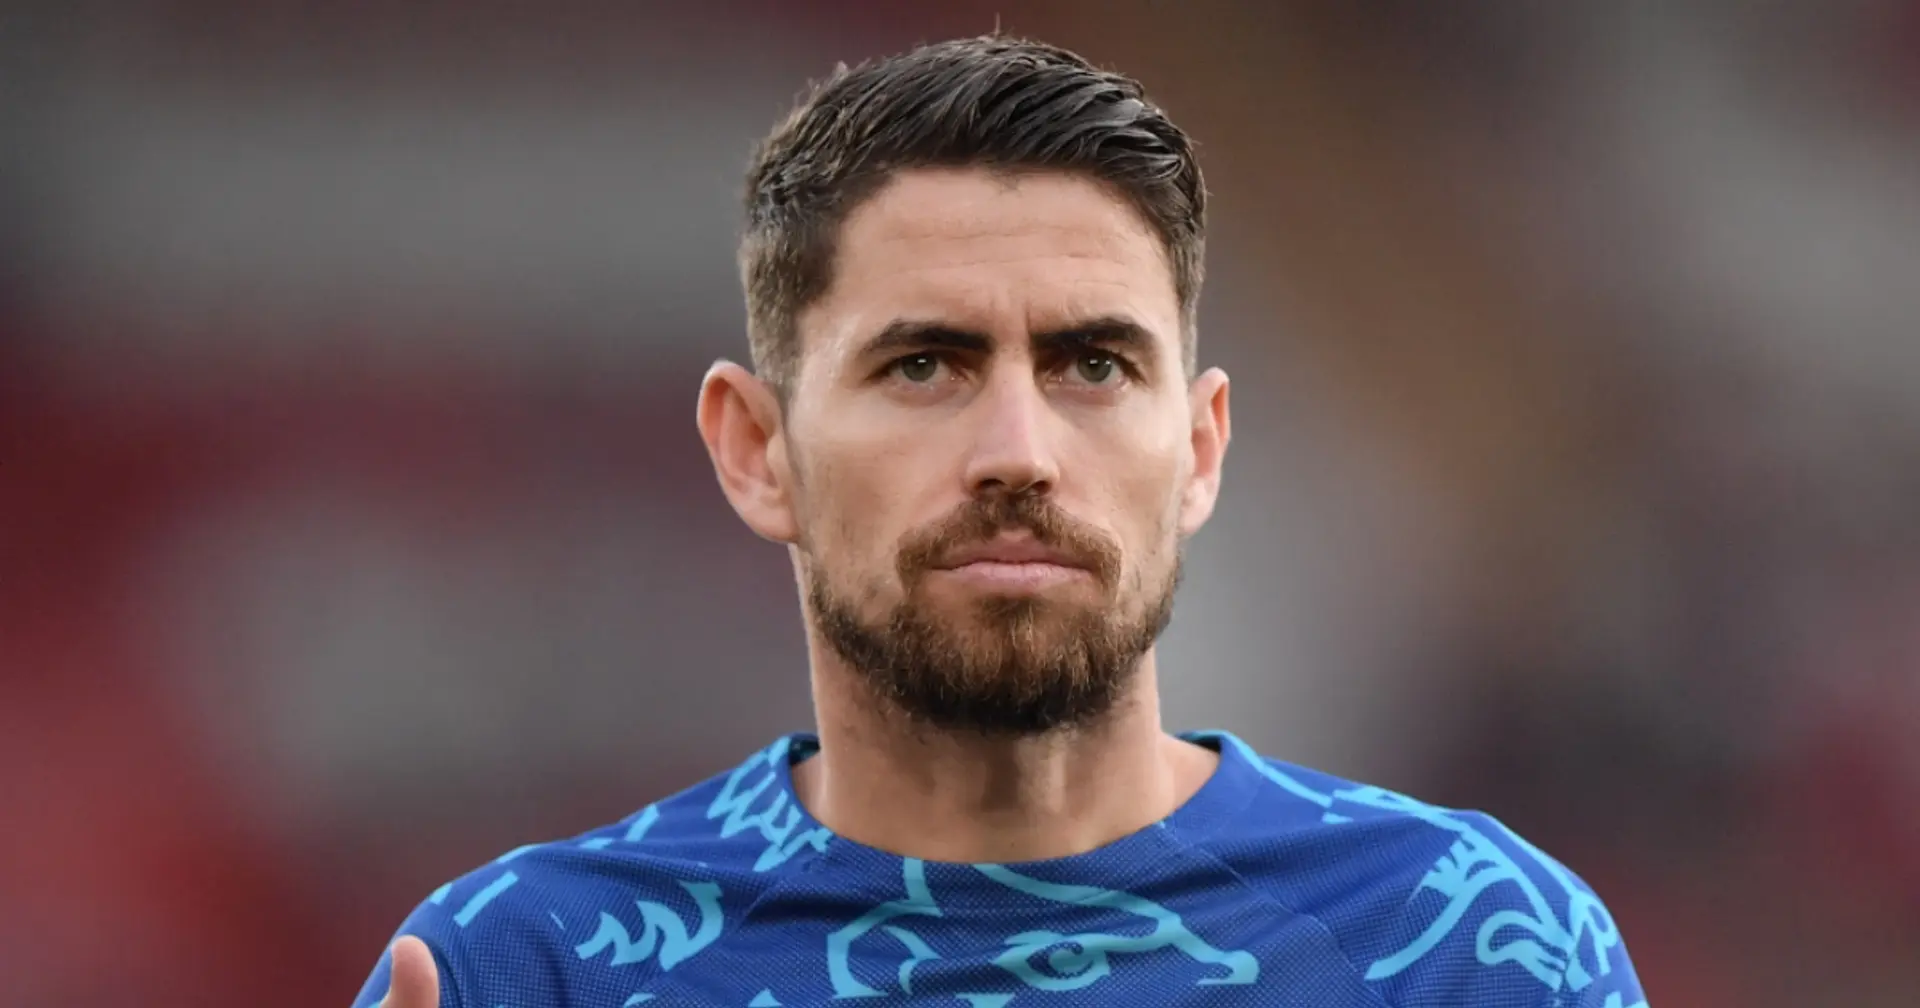 Rumours on Jorginho's contact with Barcelona rubbished, his priority revealed (reliability: 4 stars)